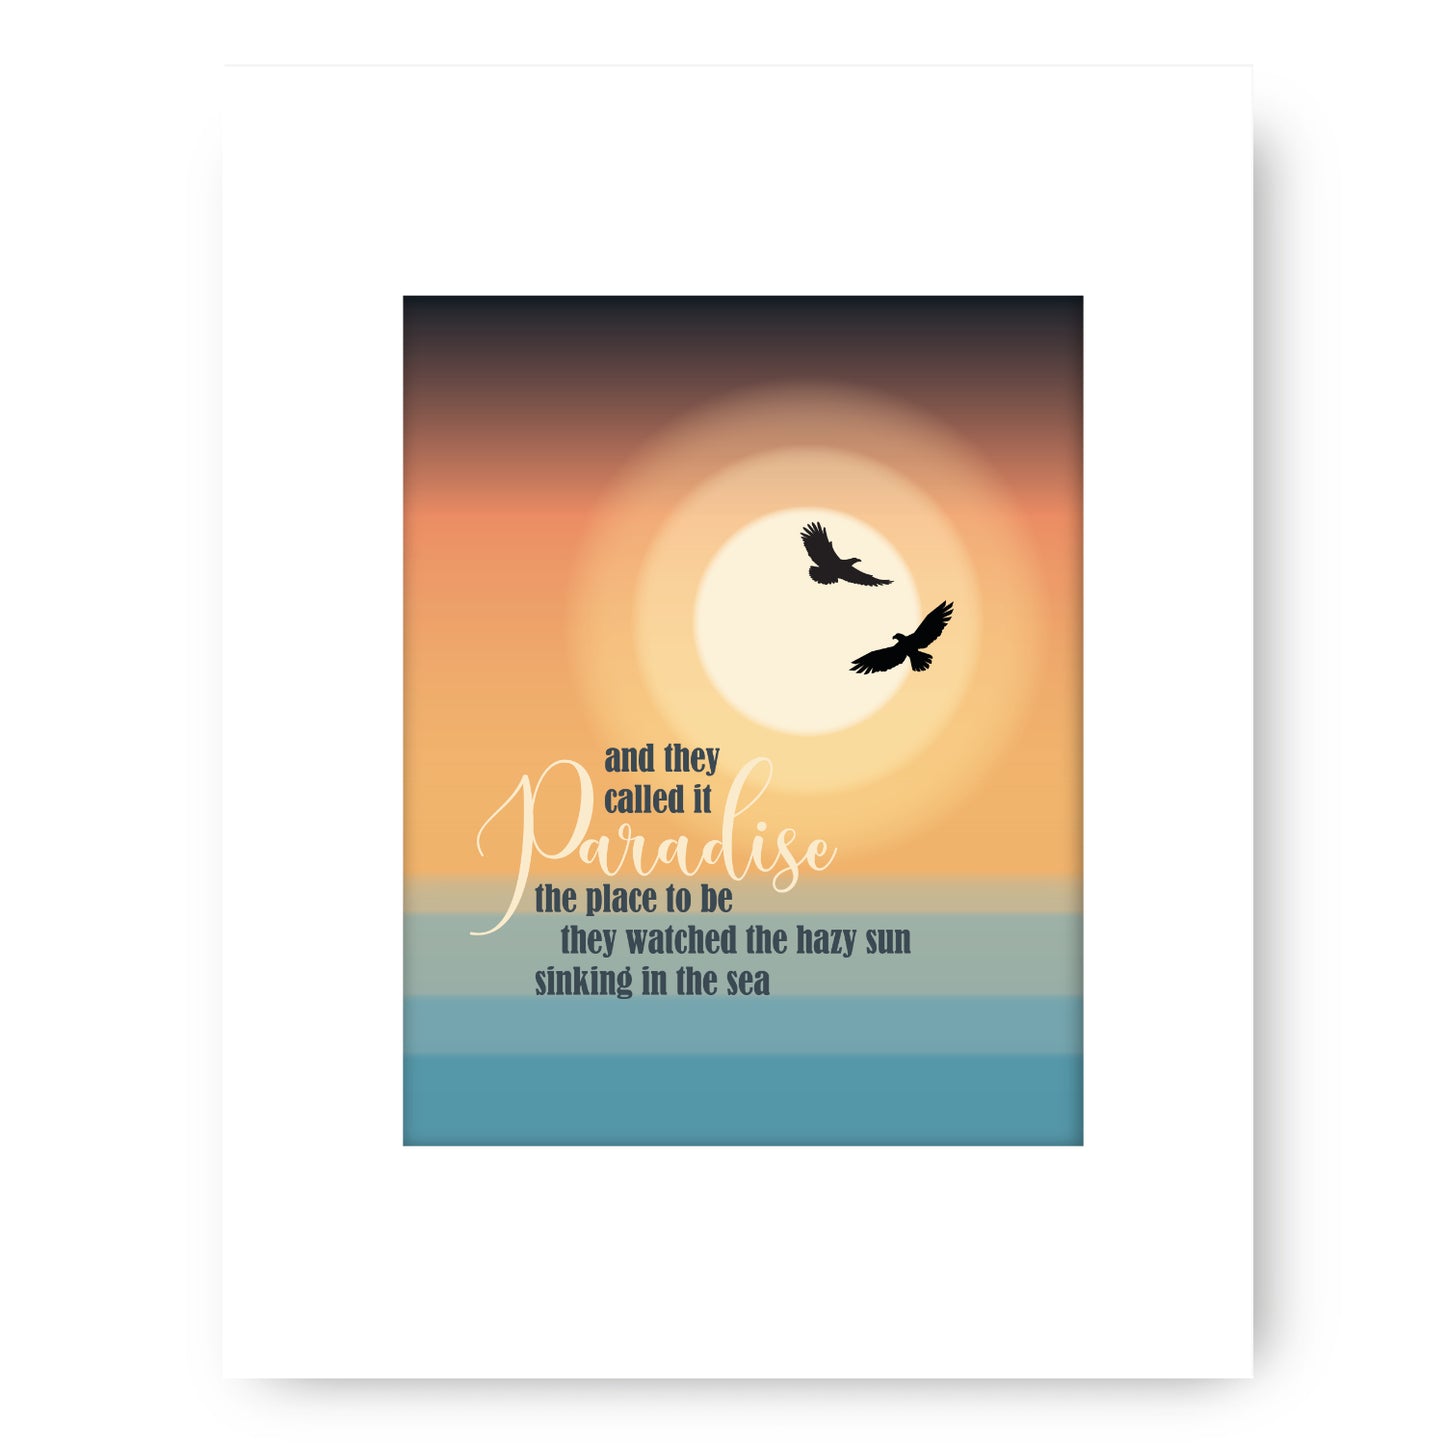 The Last Resort by the Eagles - Song Lyric Inspired Art Wall Print Room Aesthetic for Music Gallery